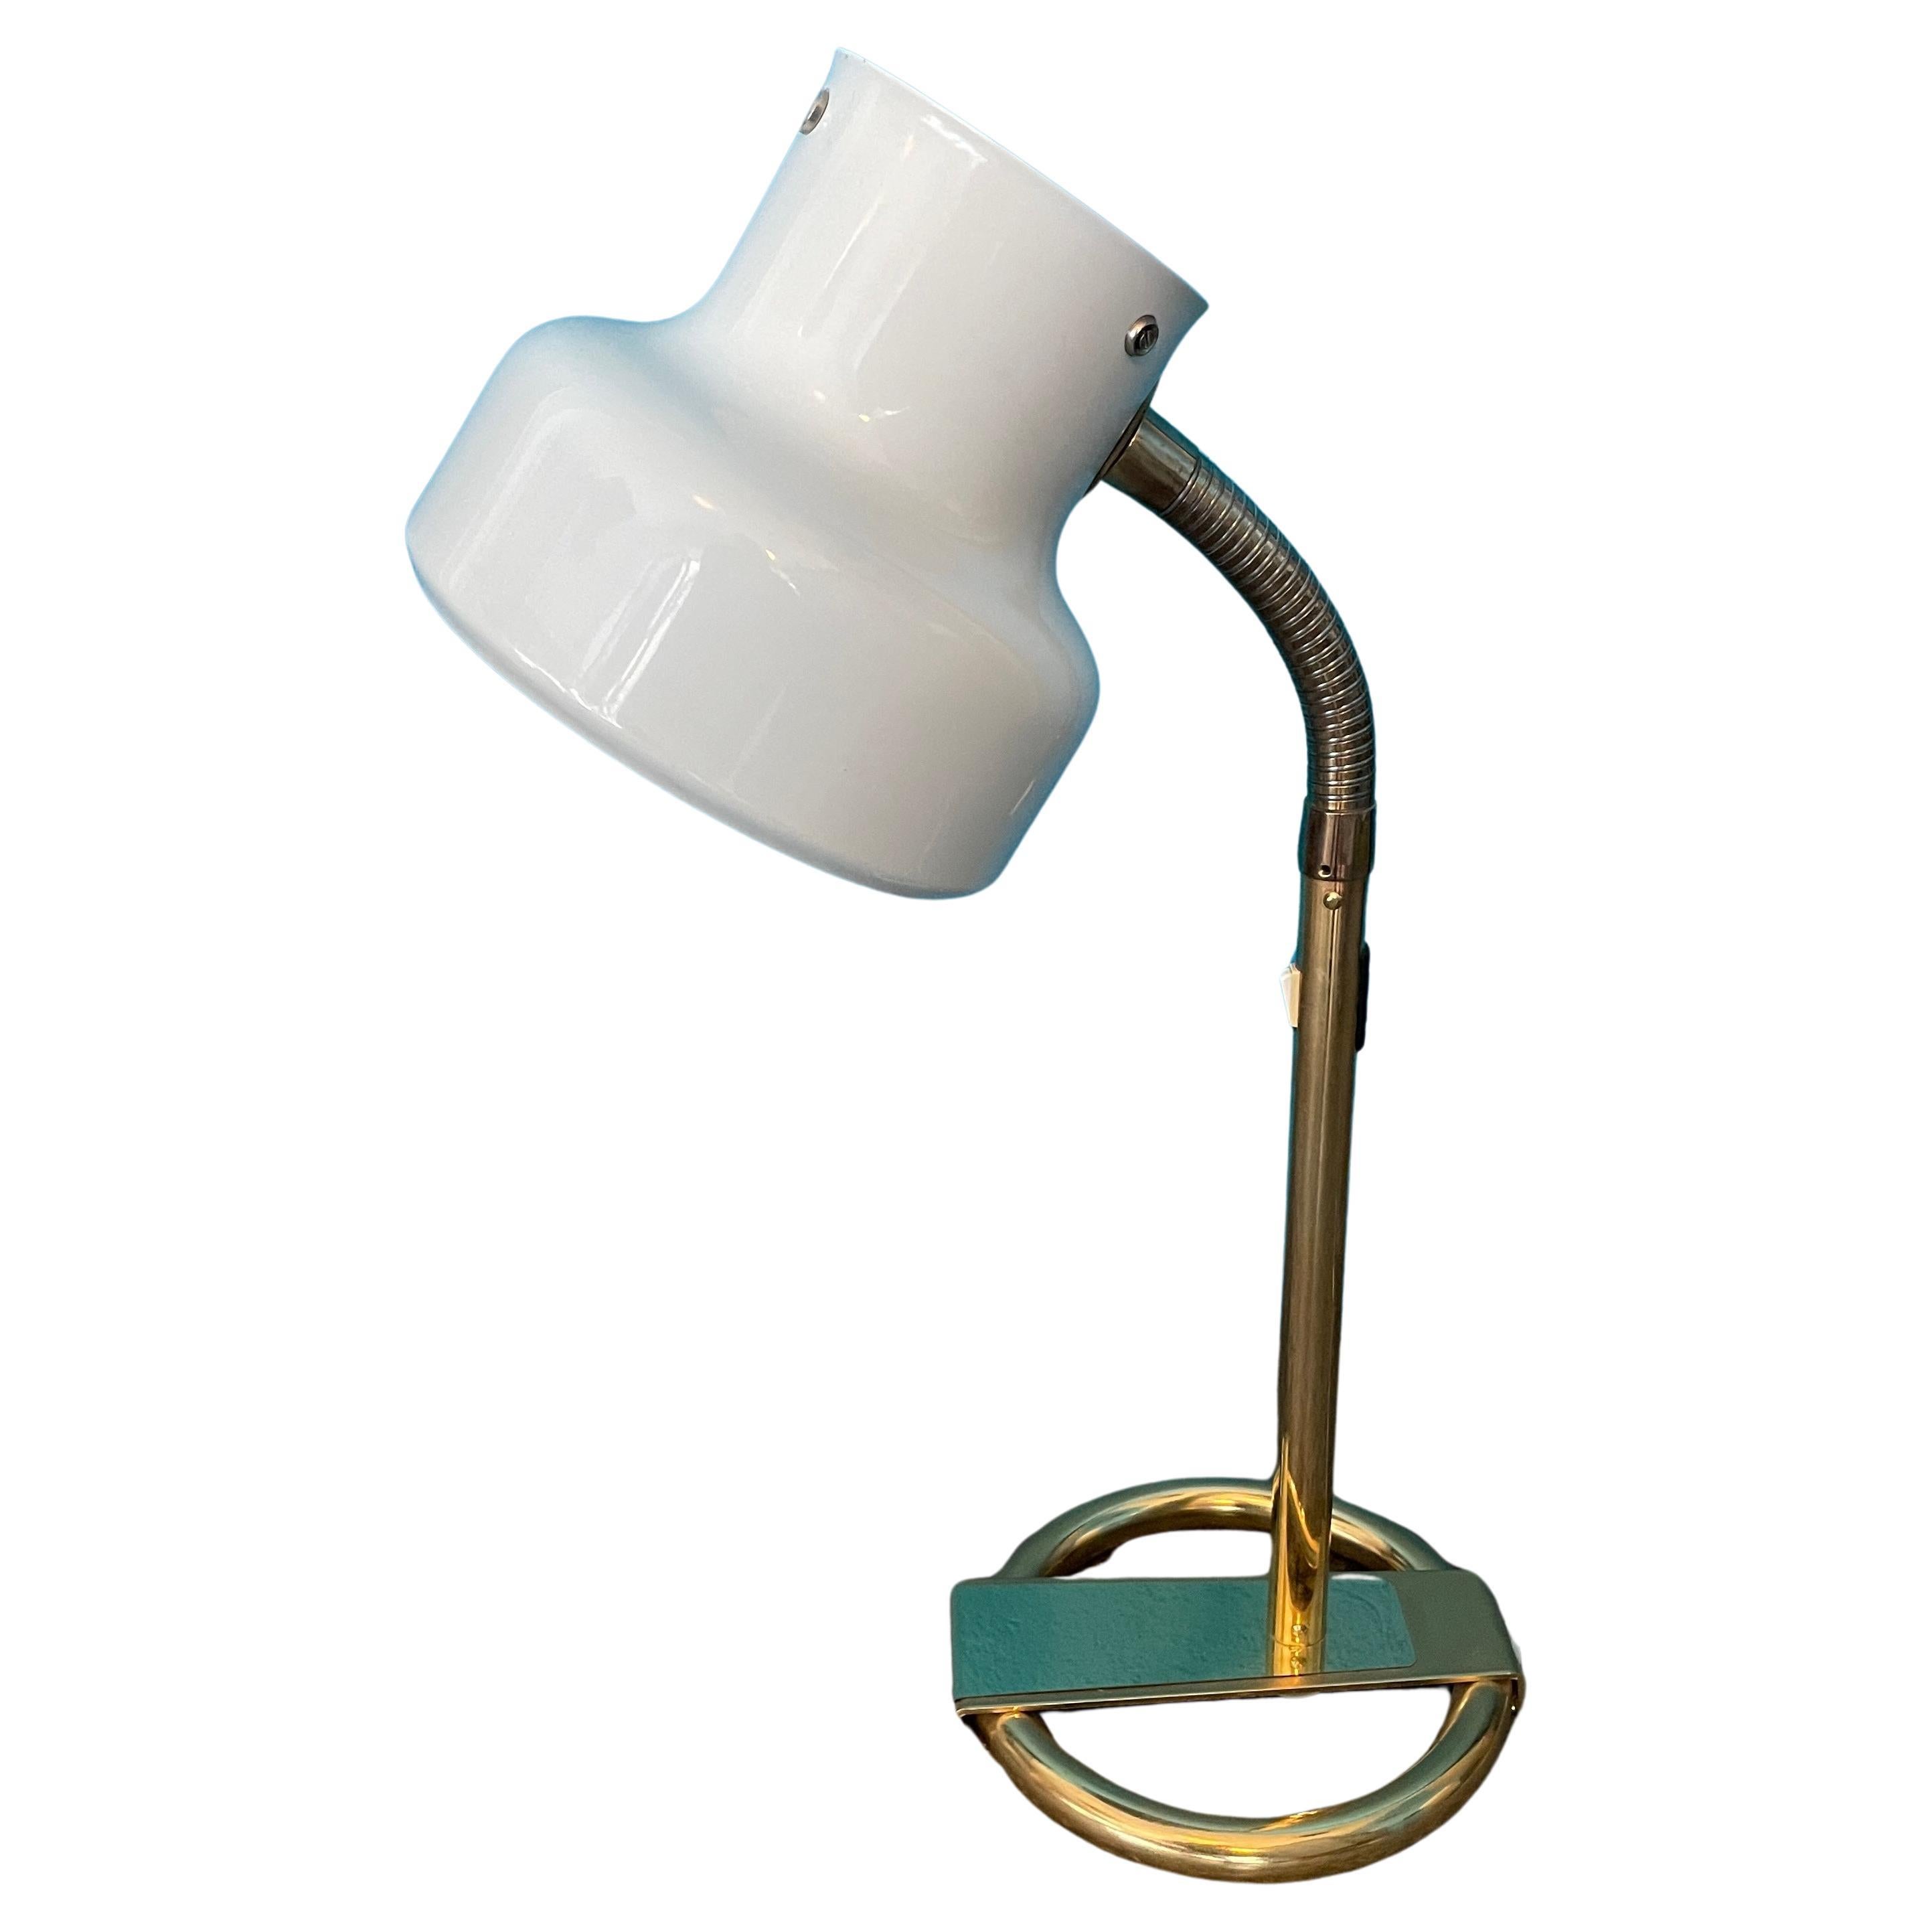 Ateljé Lyktan Bumling Desk Lamp, Designed by Anders Pehrson, Made in Sweden.  